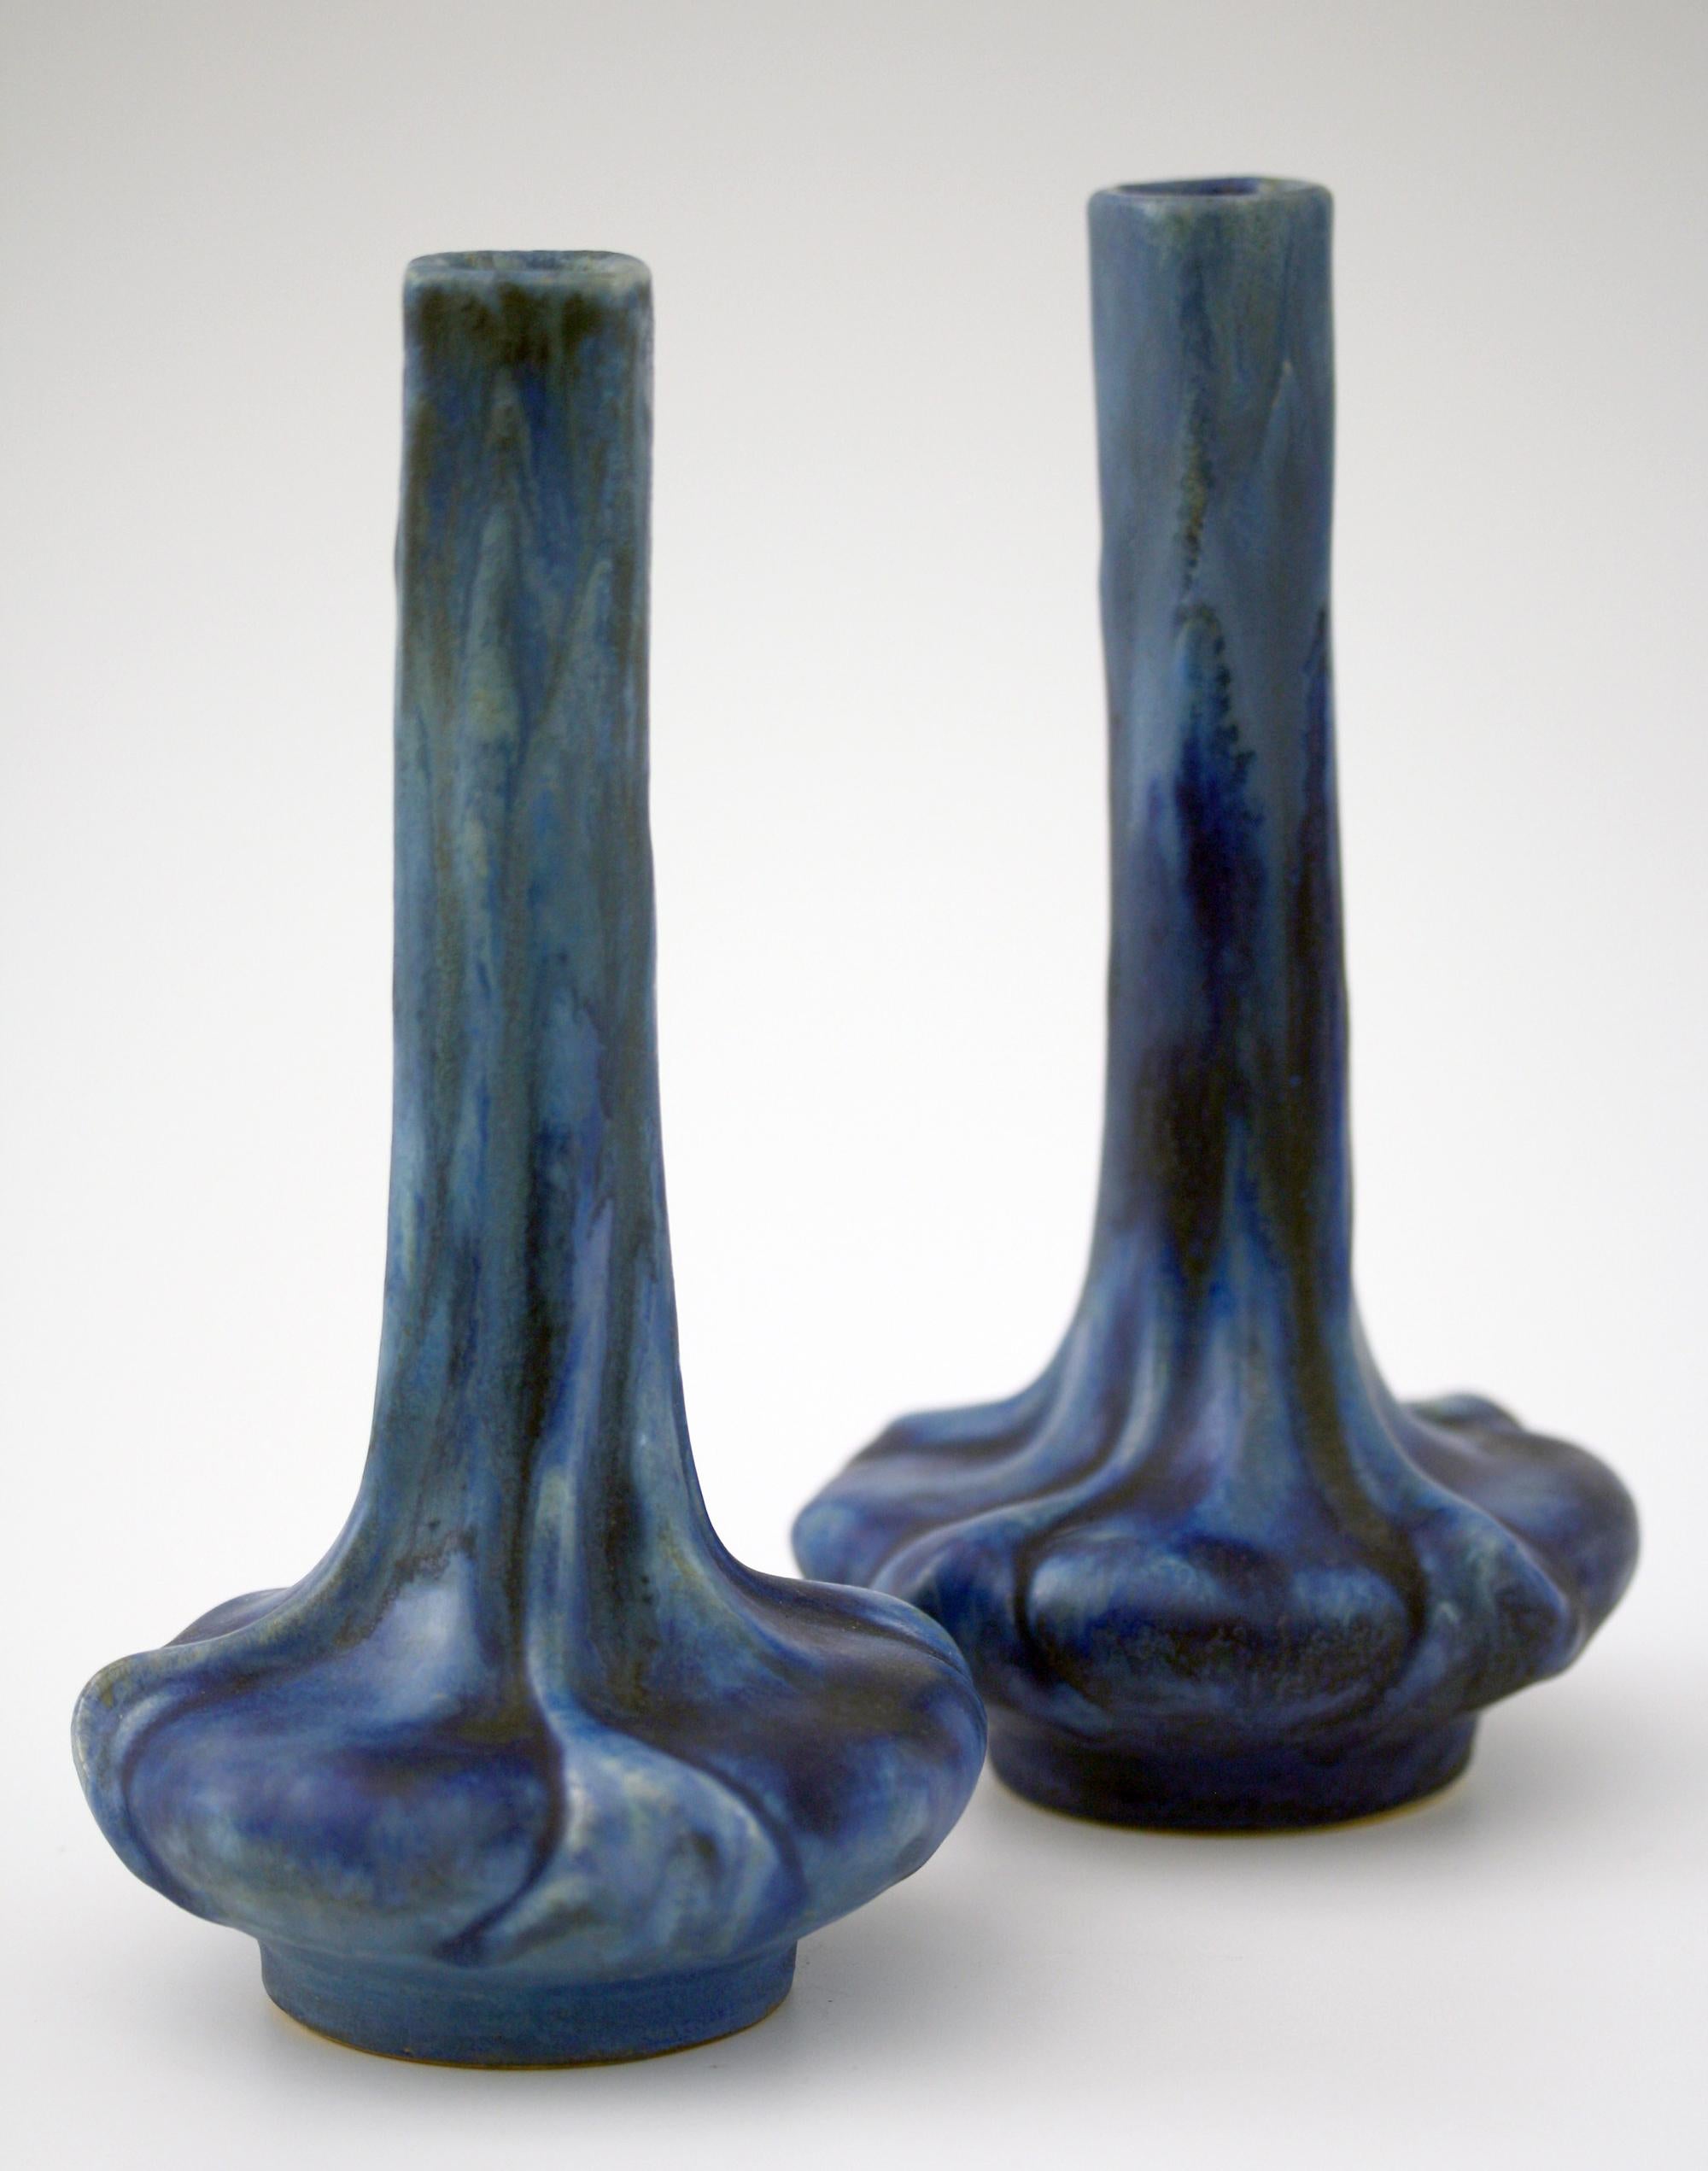 A fine pair French Art Nouveau art pottery vases decorated in blue crystalline glazes made at Olivier de Sorra's (Count Hallez d'Arros) Pierrefonds Pottery and dating from circa 1910. The vases stand on a narrow rounded foot with a moulded flower